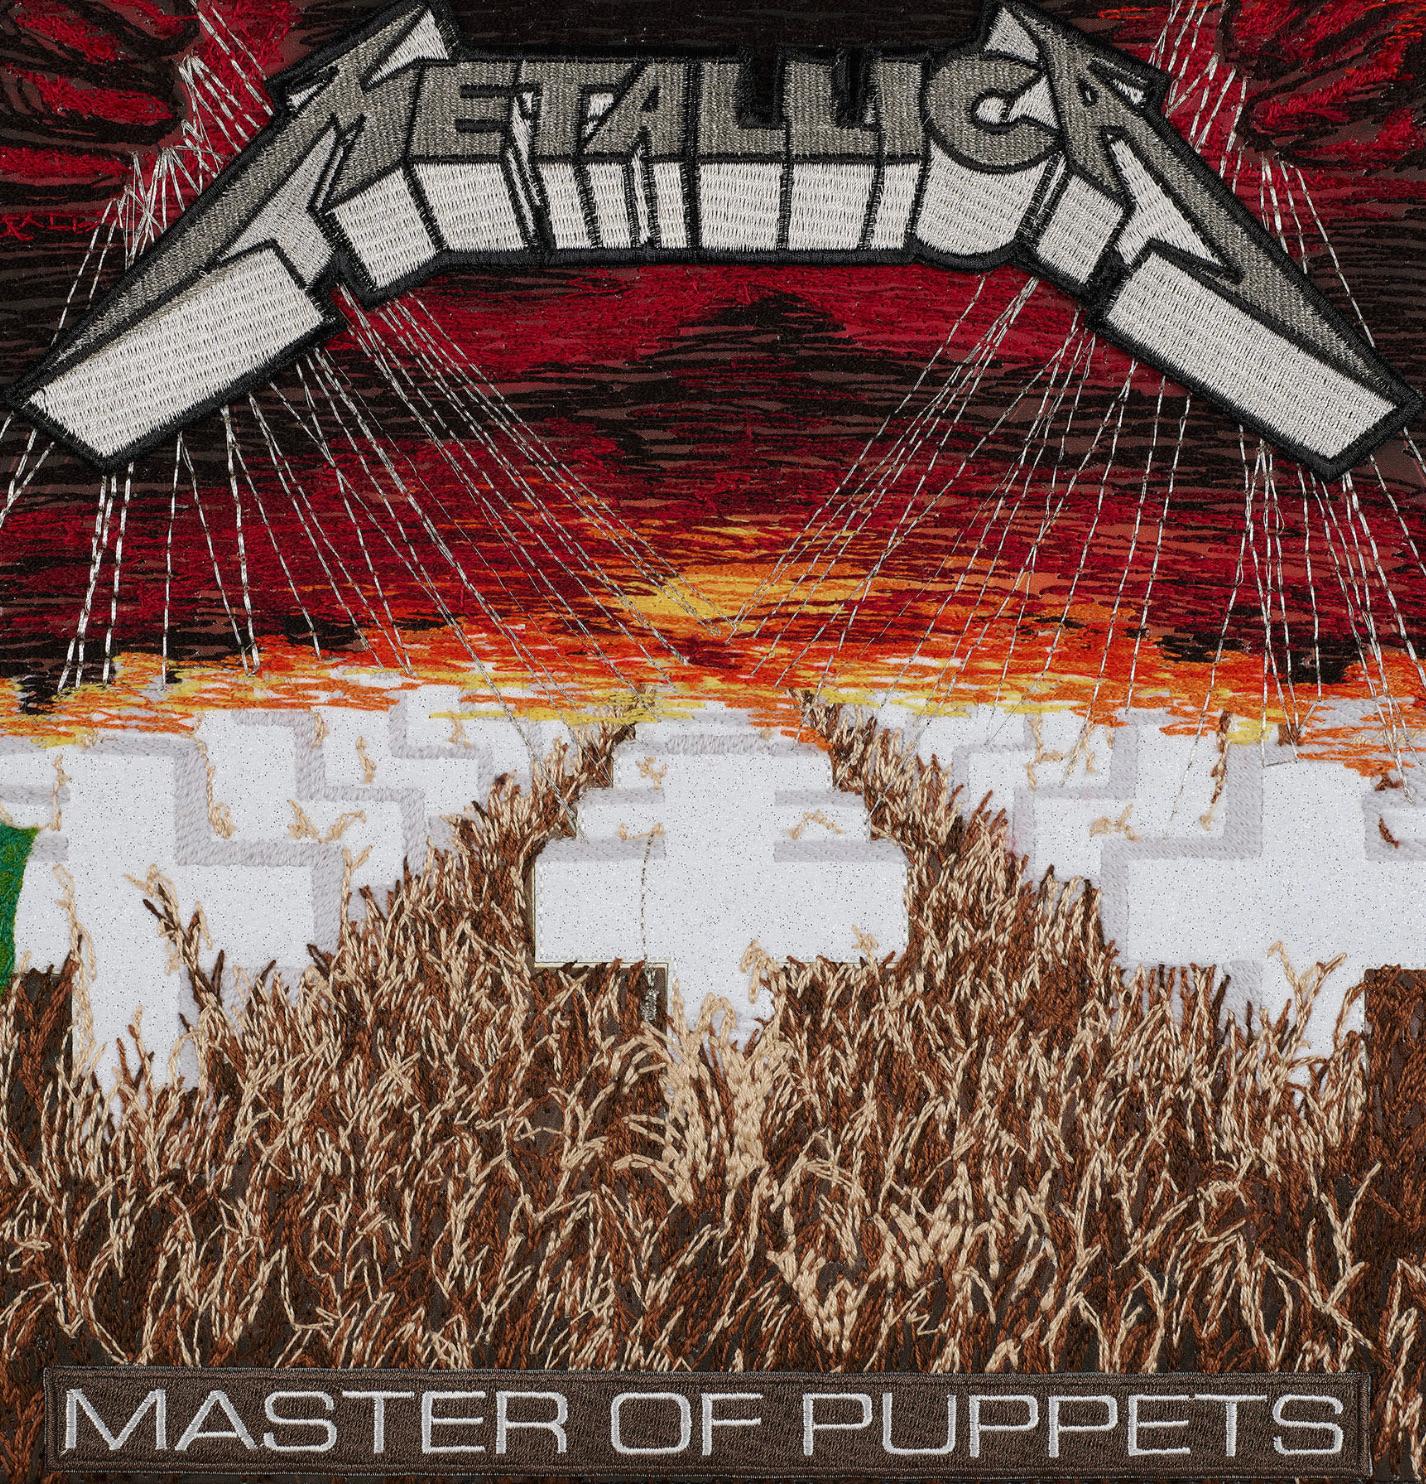 Master of Puppets, Metallica, Embroidery Assemblage  - Mixed Media Art by Stephen Wilson